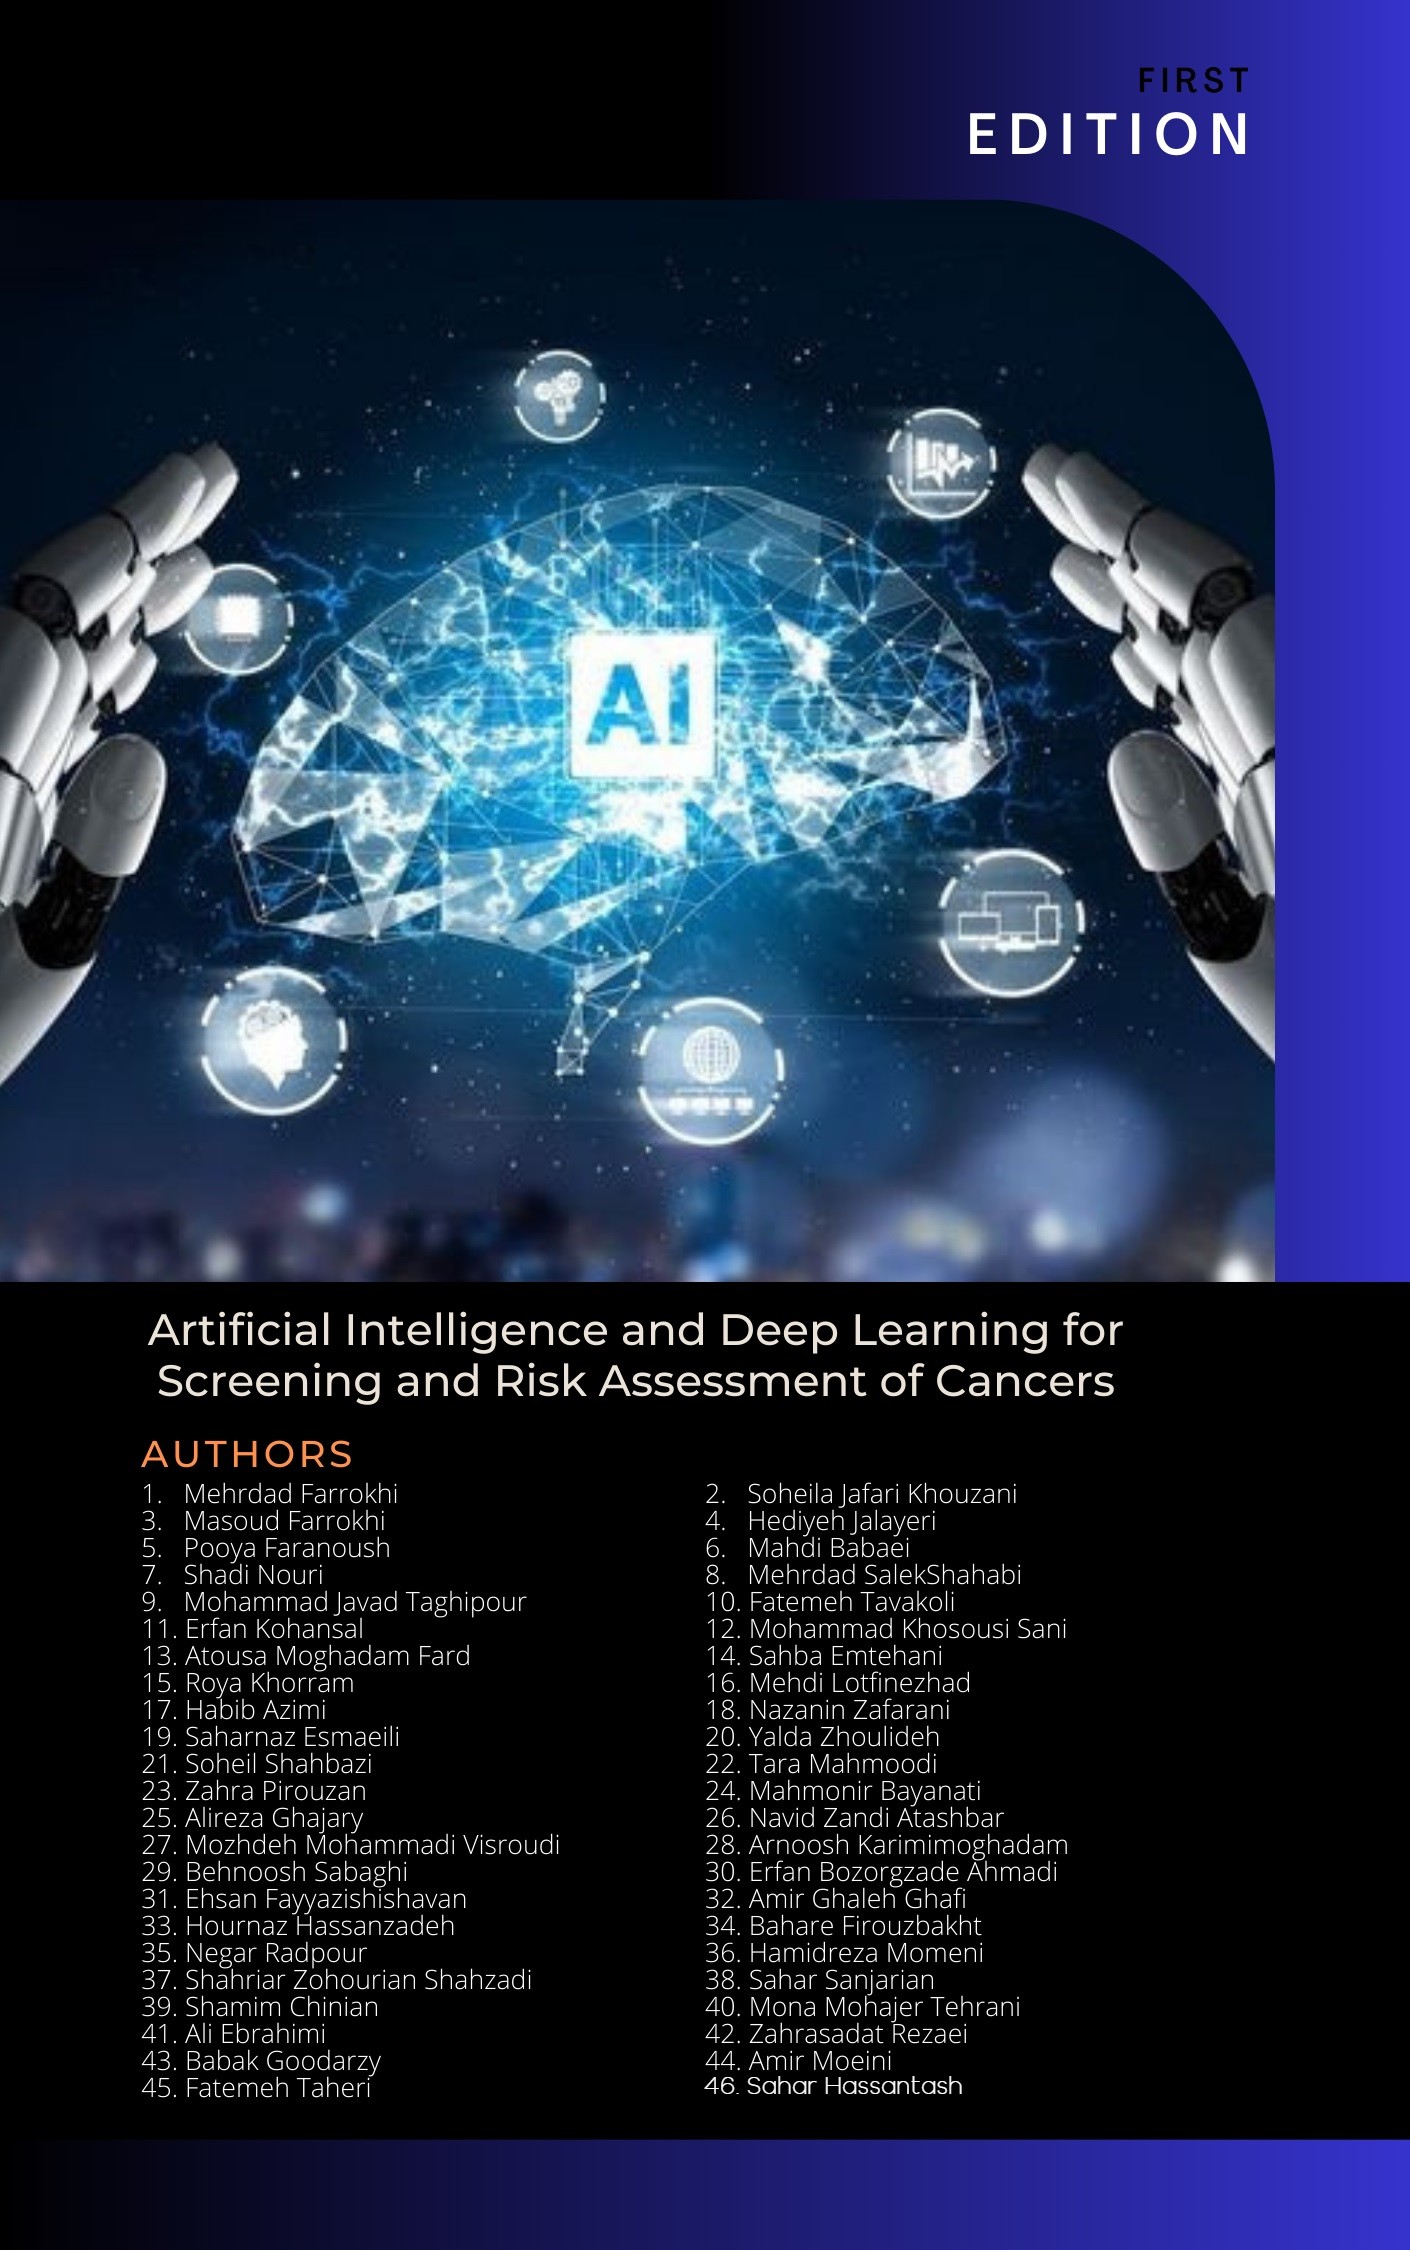 Artificial Intelligence and Deep Learning for Screening and Risk Assessment of Cancers